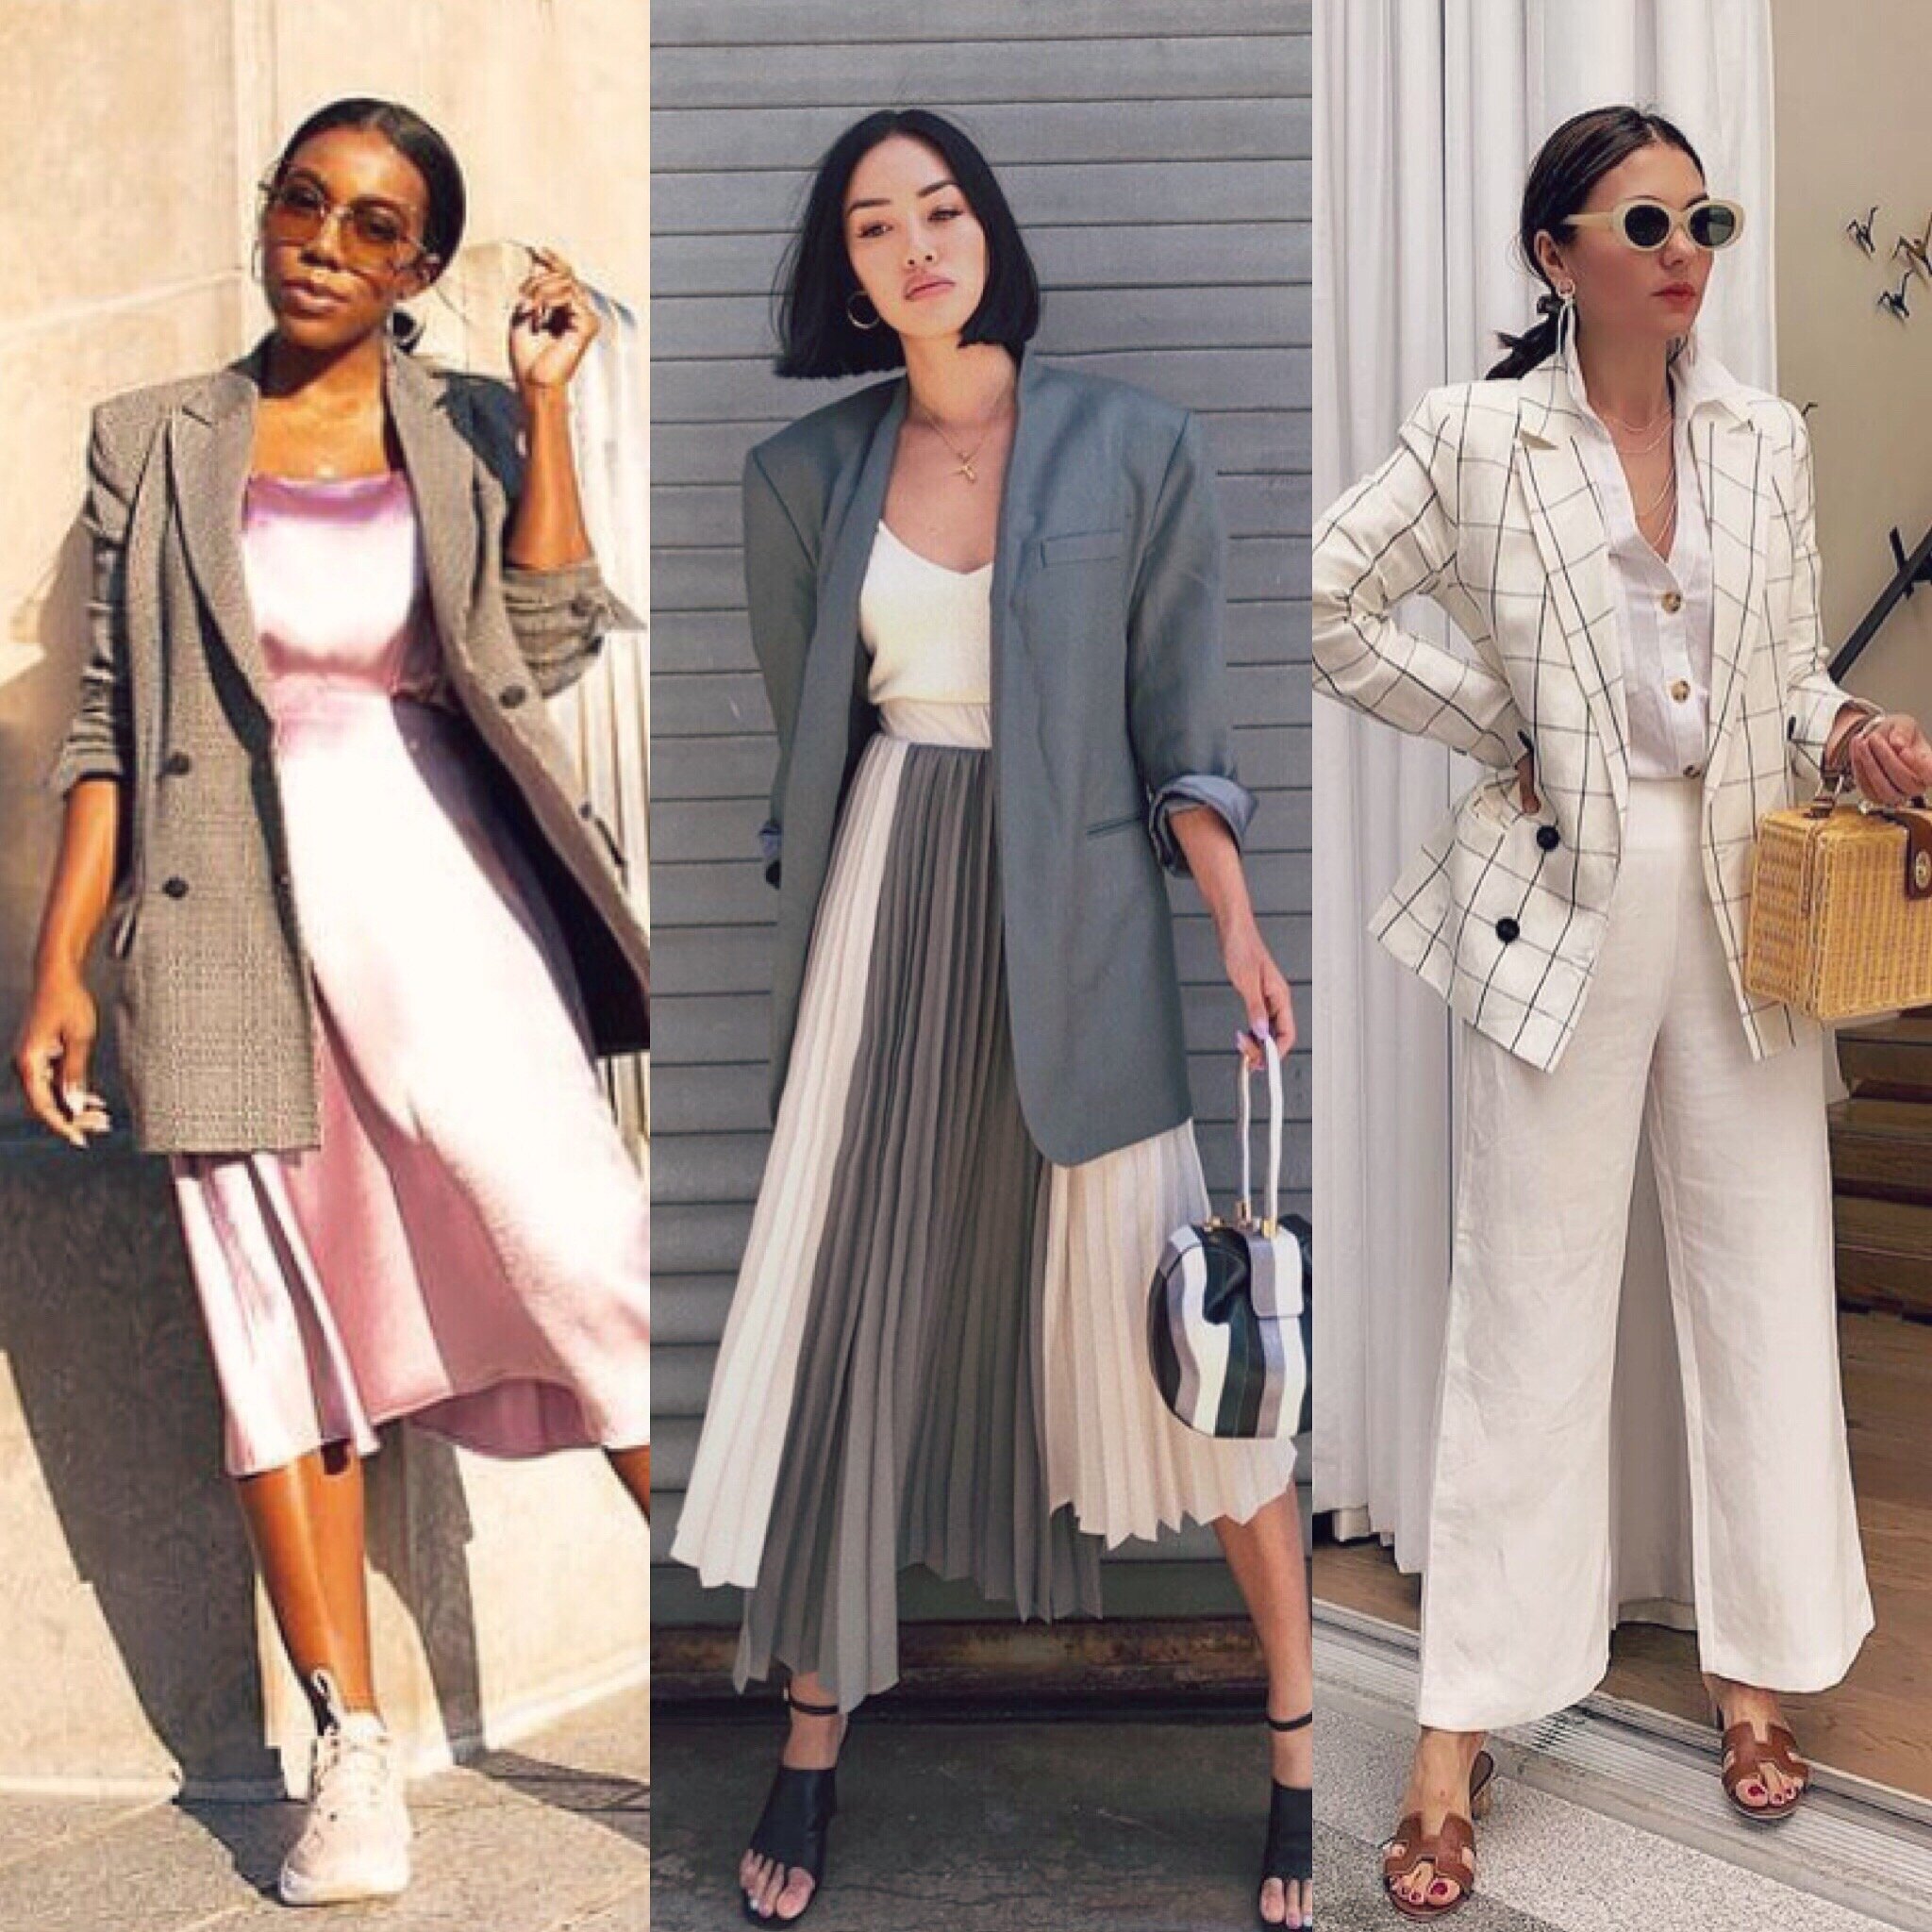   When it comes to workplace LEWKS, an oversized blazer is one of the most boss pieces you can wear. It oozes power and confidence, but still seems effortlessly cool. Here’s 3 no-fail blazer combos for those days when you need an extra dose of boss v